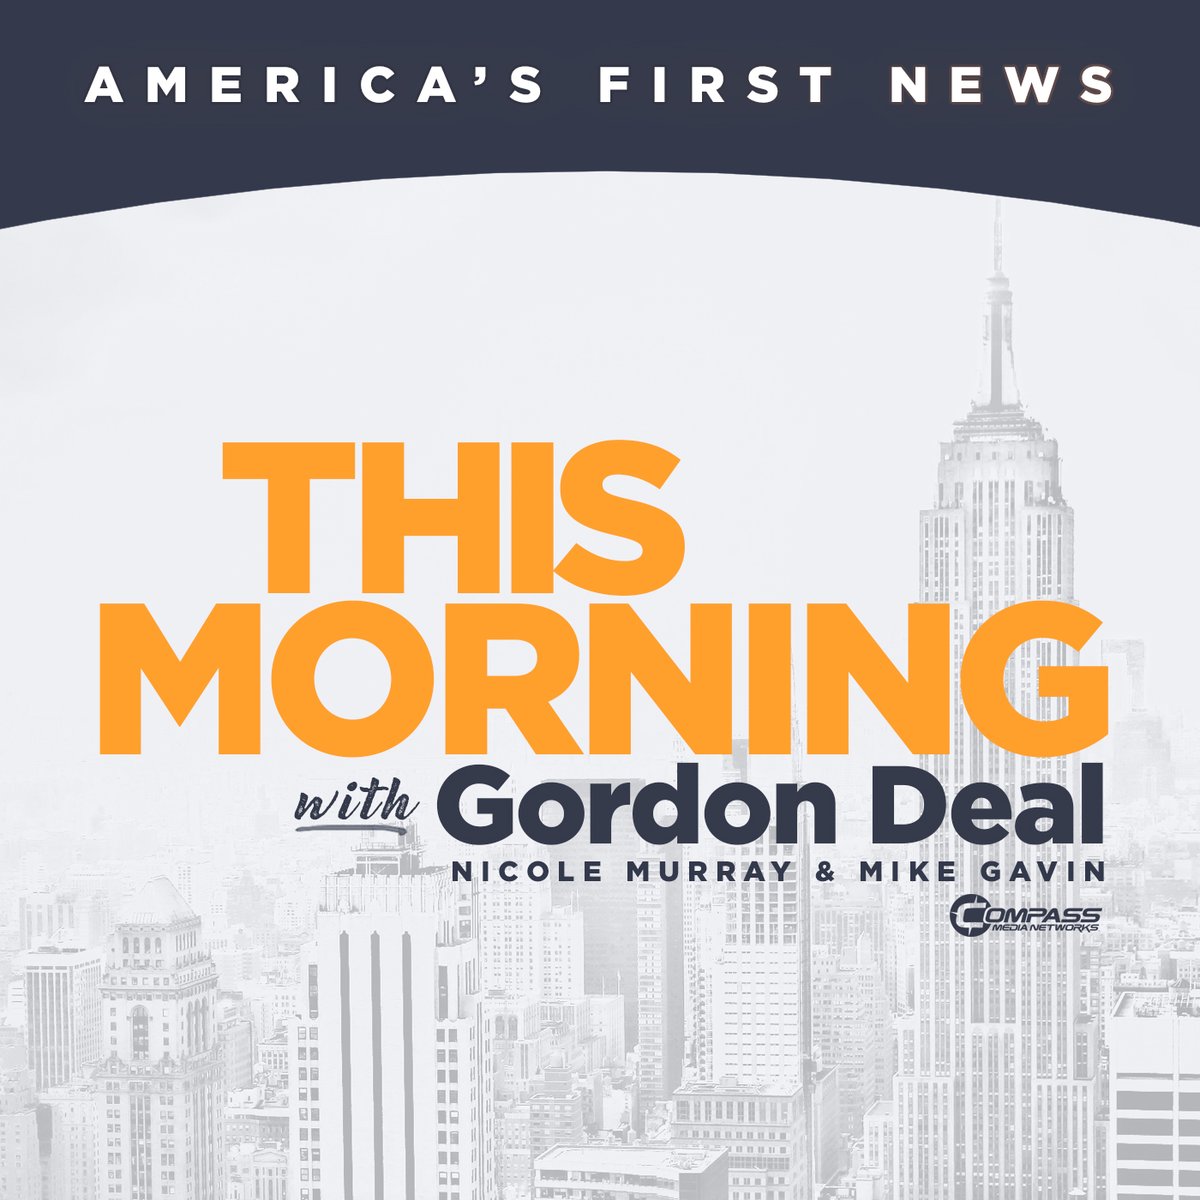 Will freezing weapon shipments to Israel affect their push into Rafah? Retired U.S. Army Colonel @JoeBuccino10 joined @GordonDeal with a look. #AmericasFirstNews thismorningwithgordondeal.com/n/kqjfdq